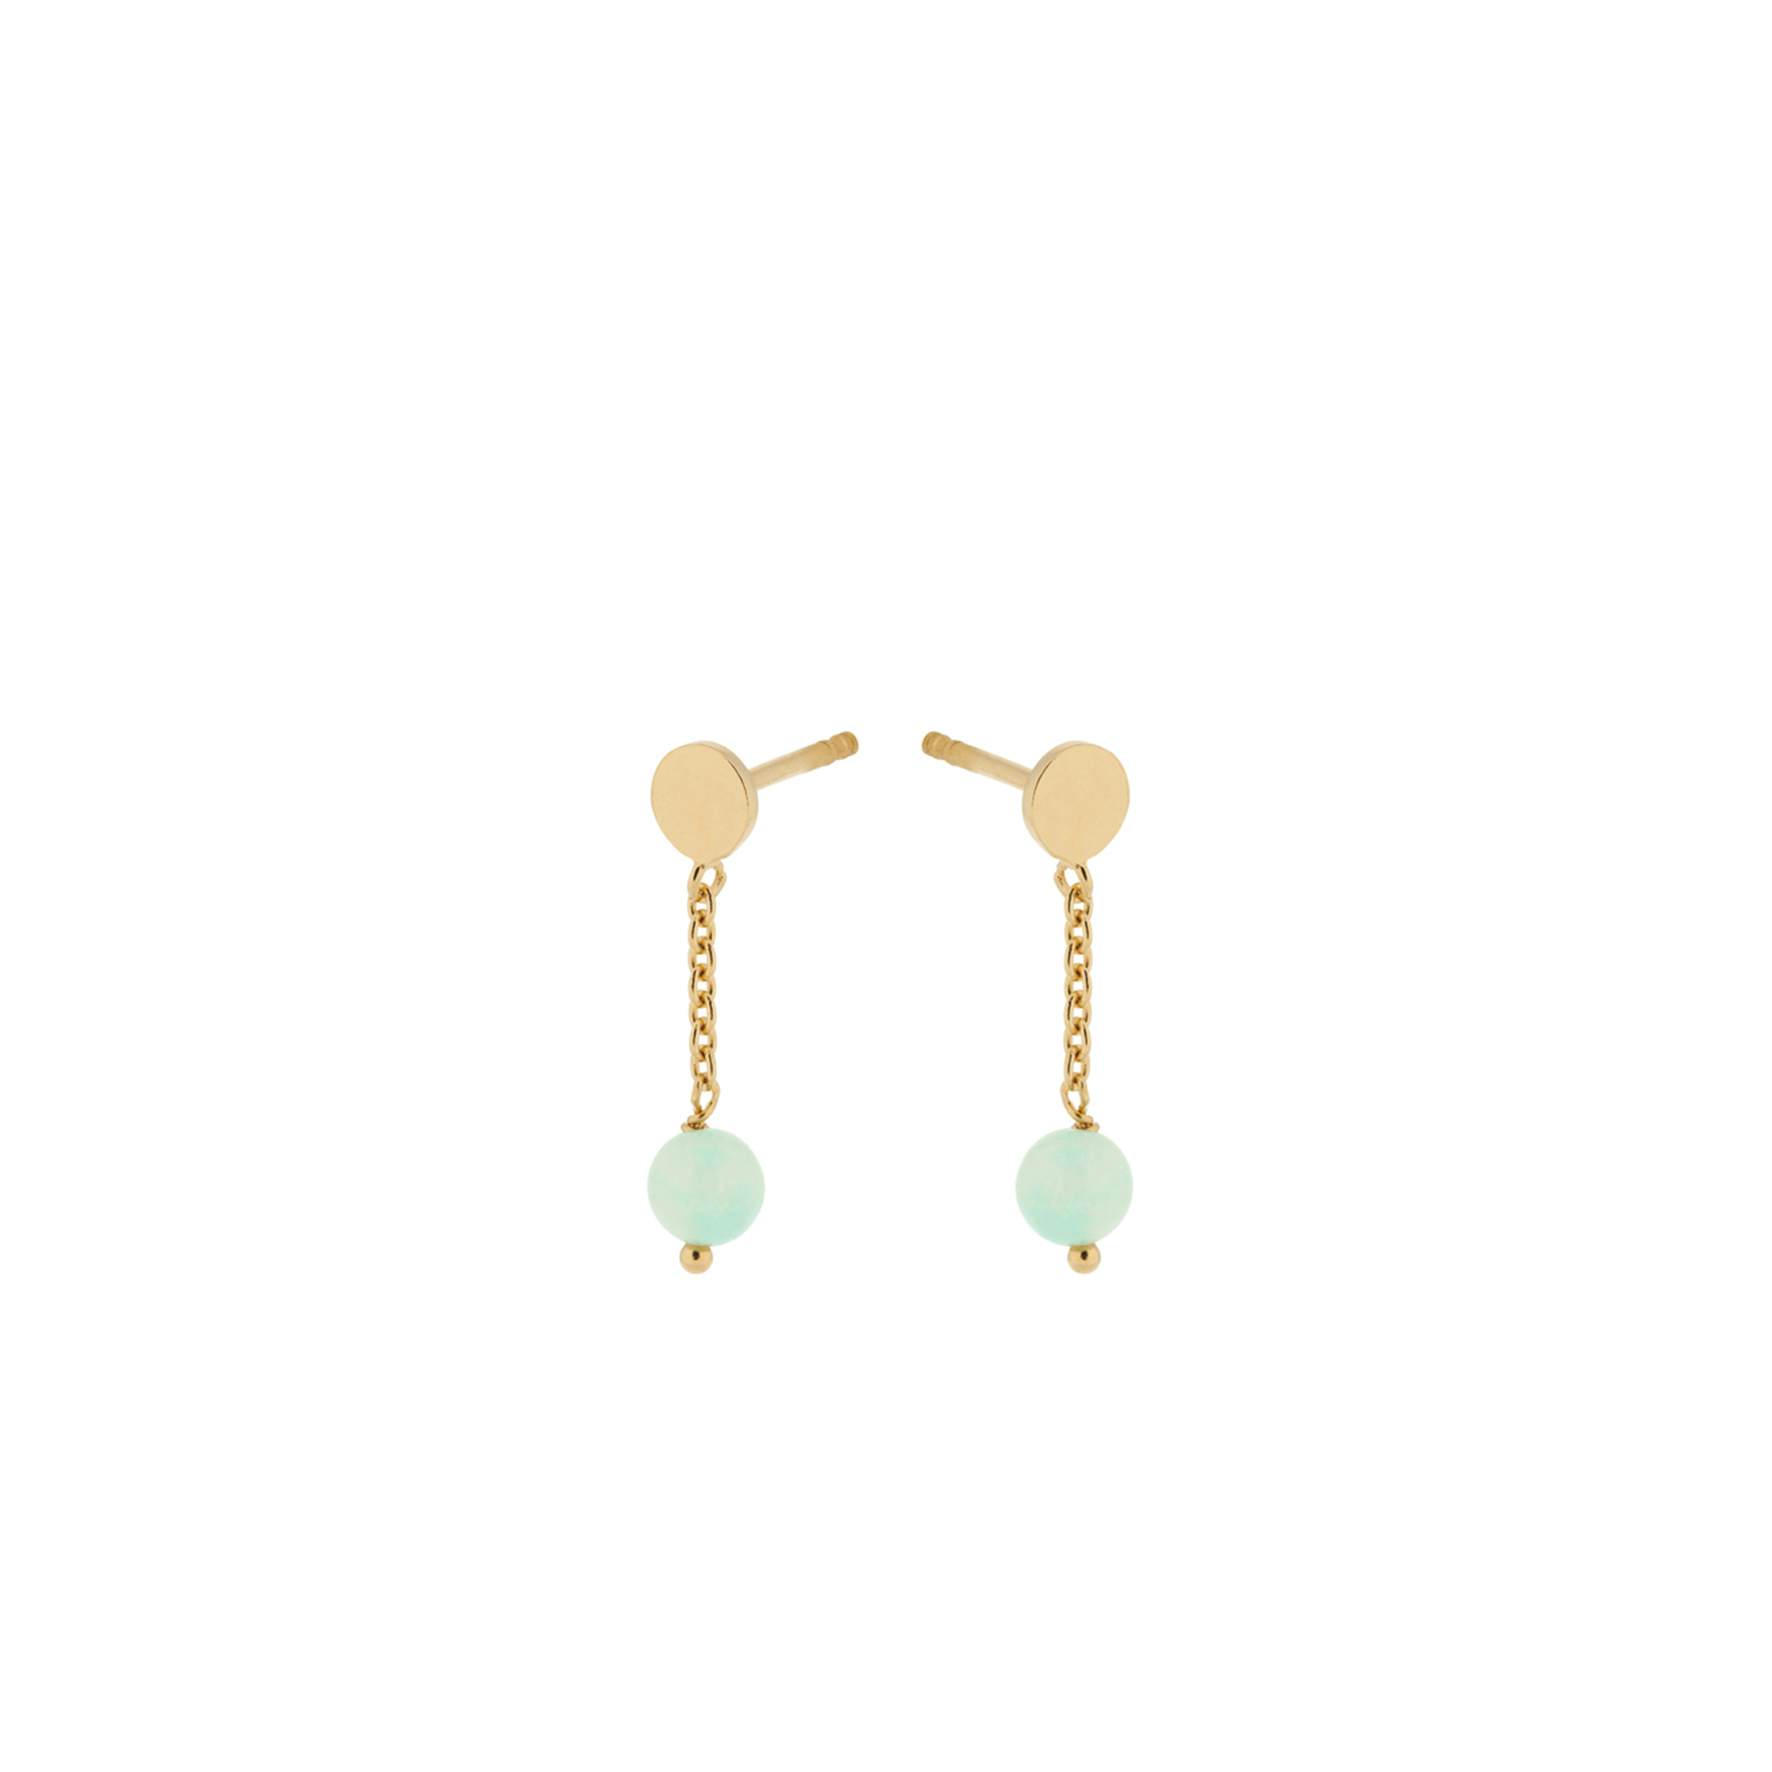 Fjord Earsticks from Pernille Corydon in Goldplated-Silver Sterling 925|Amazonite